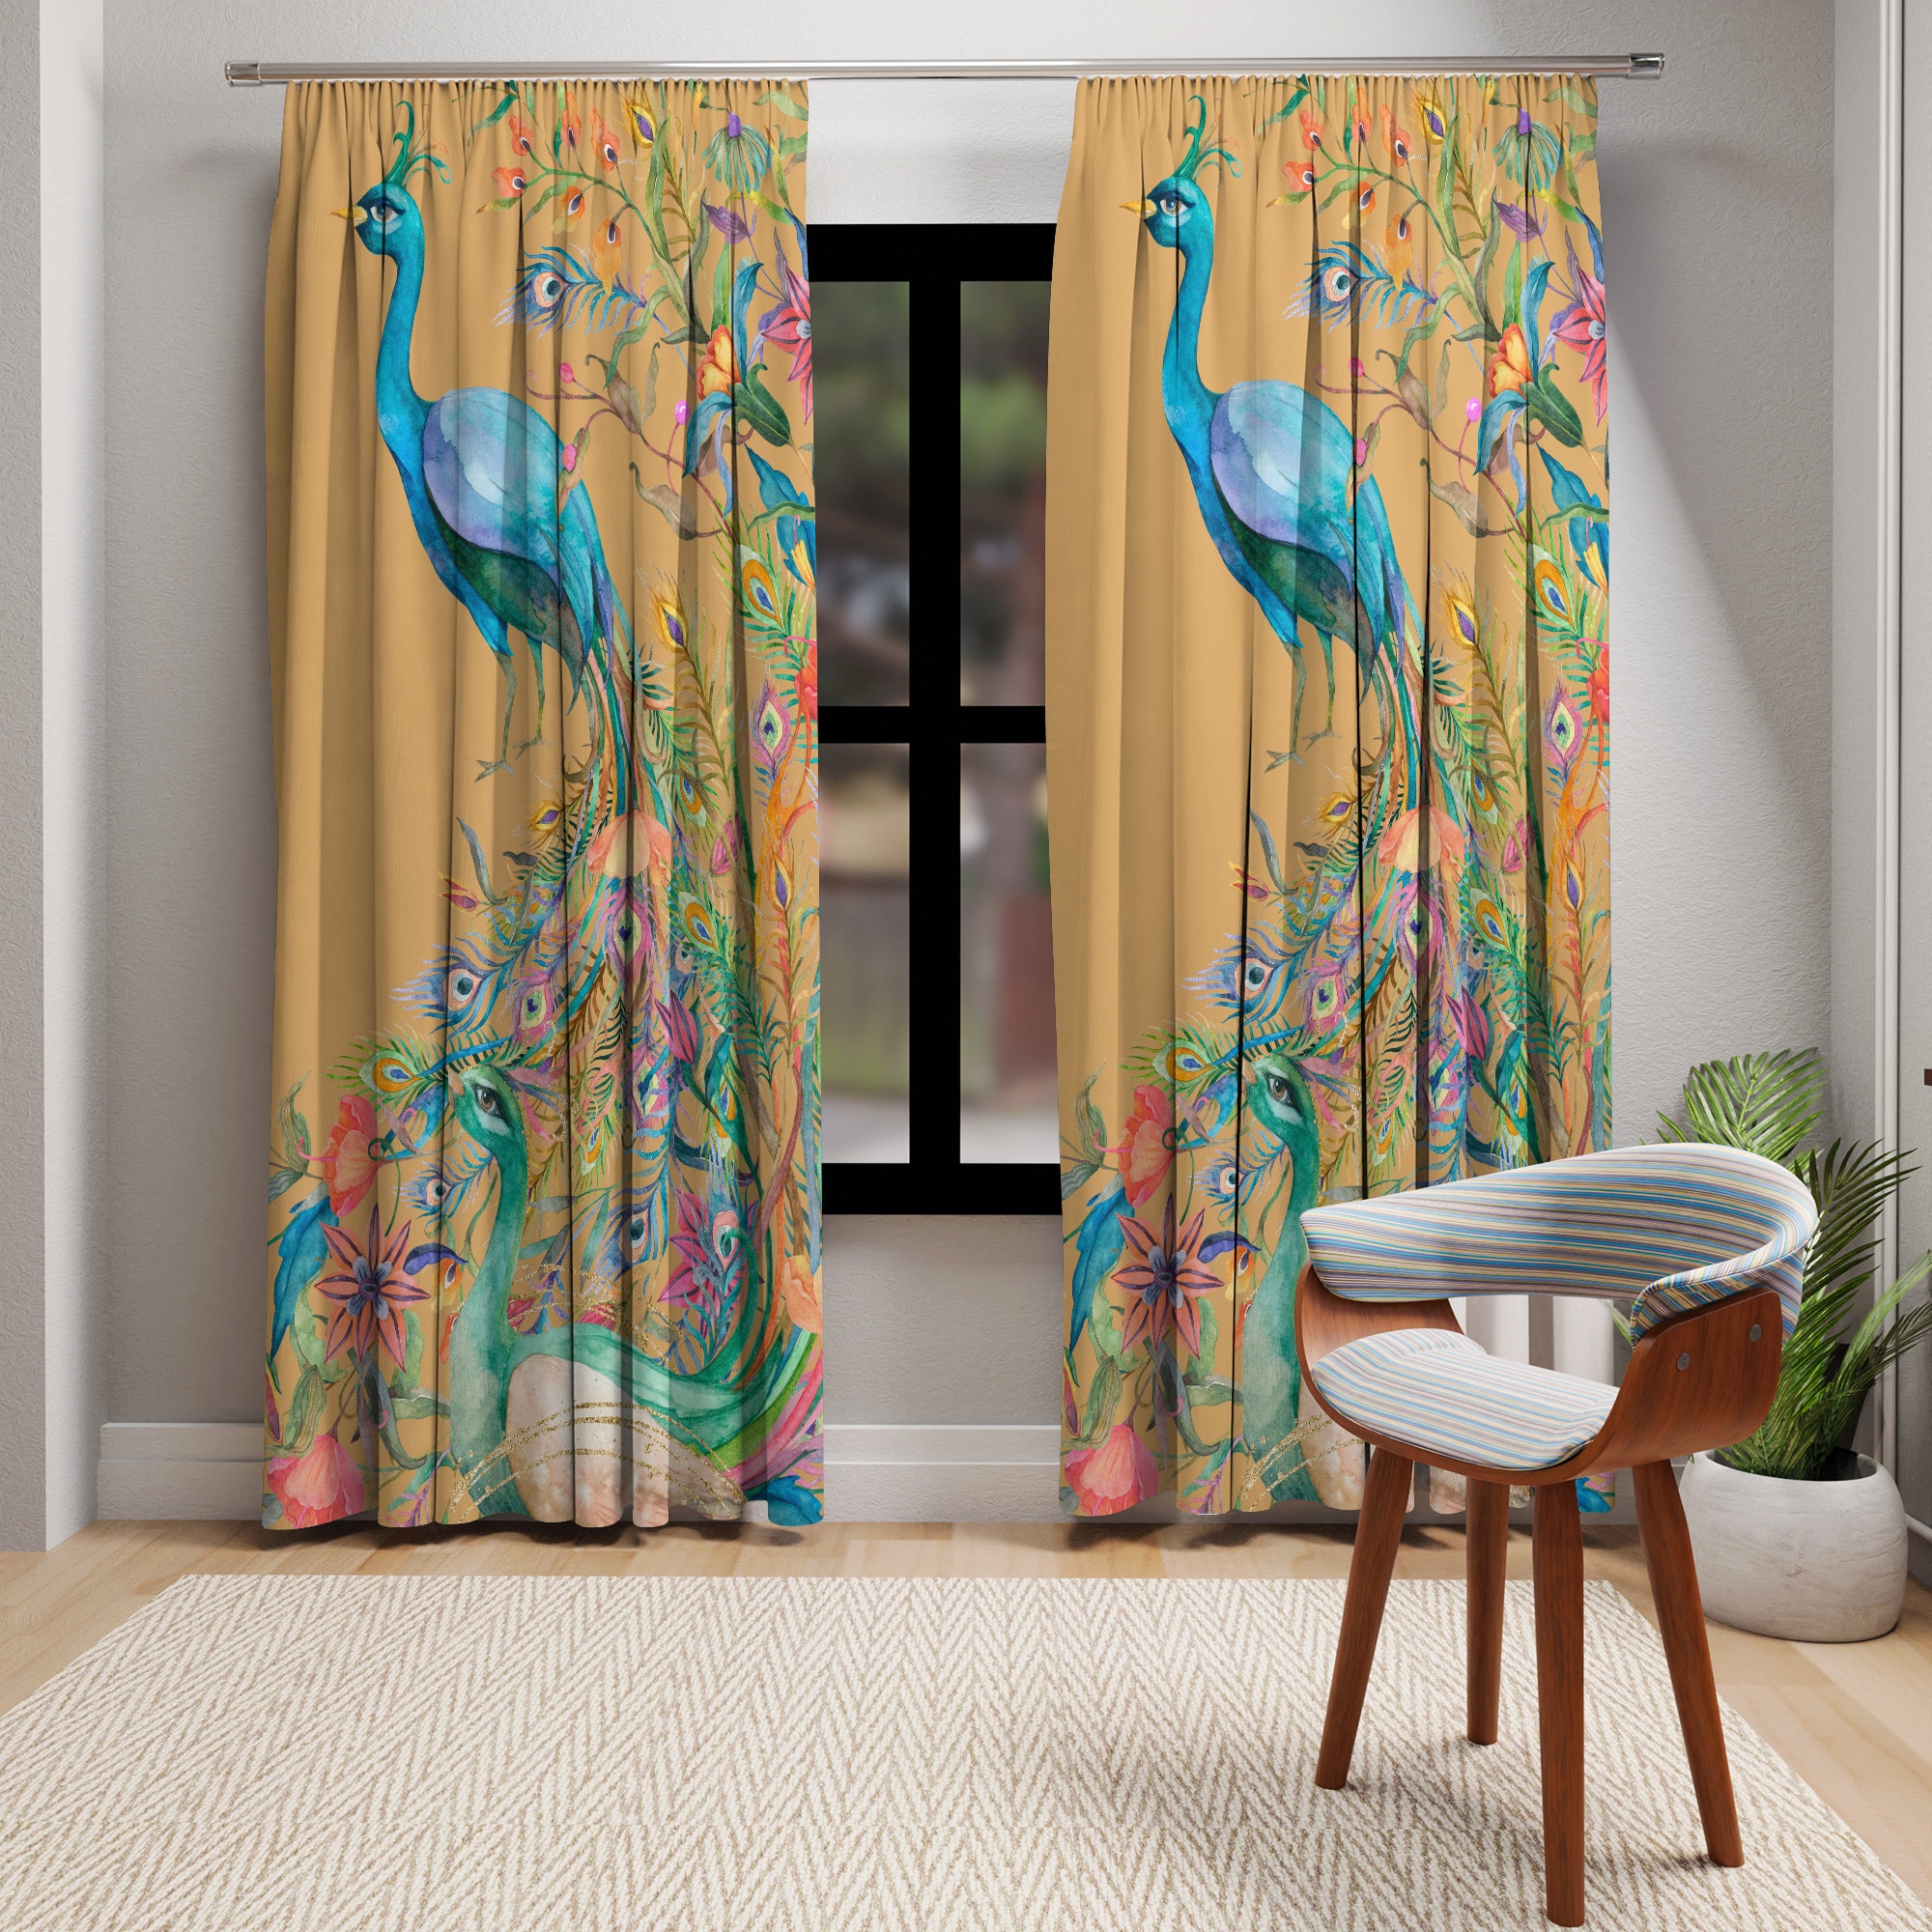 Embroidered Tulle Curtains Panels Peacock Window Treatments Home Decorations New 